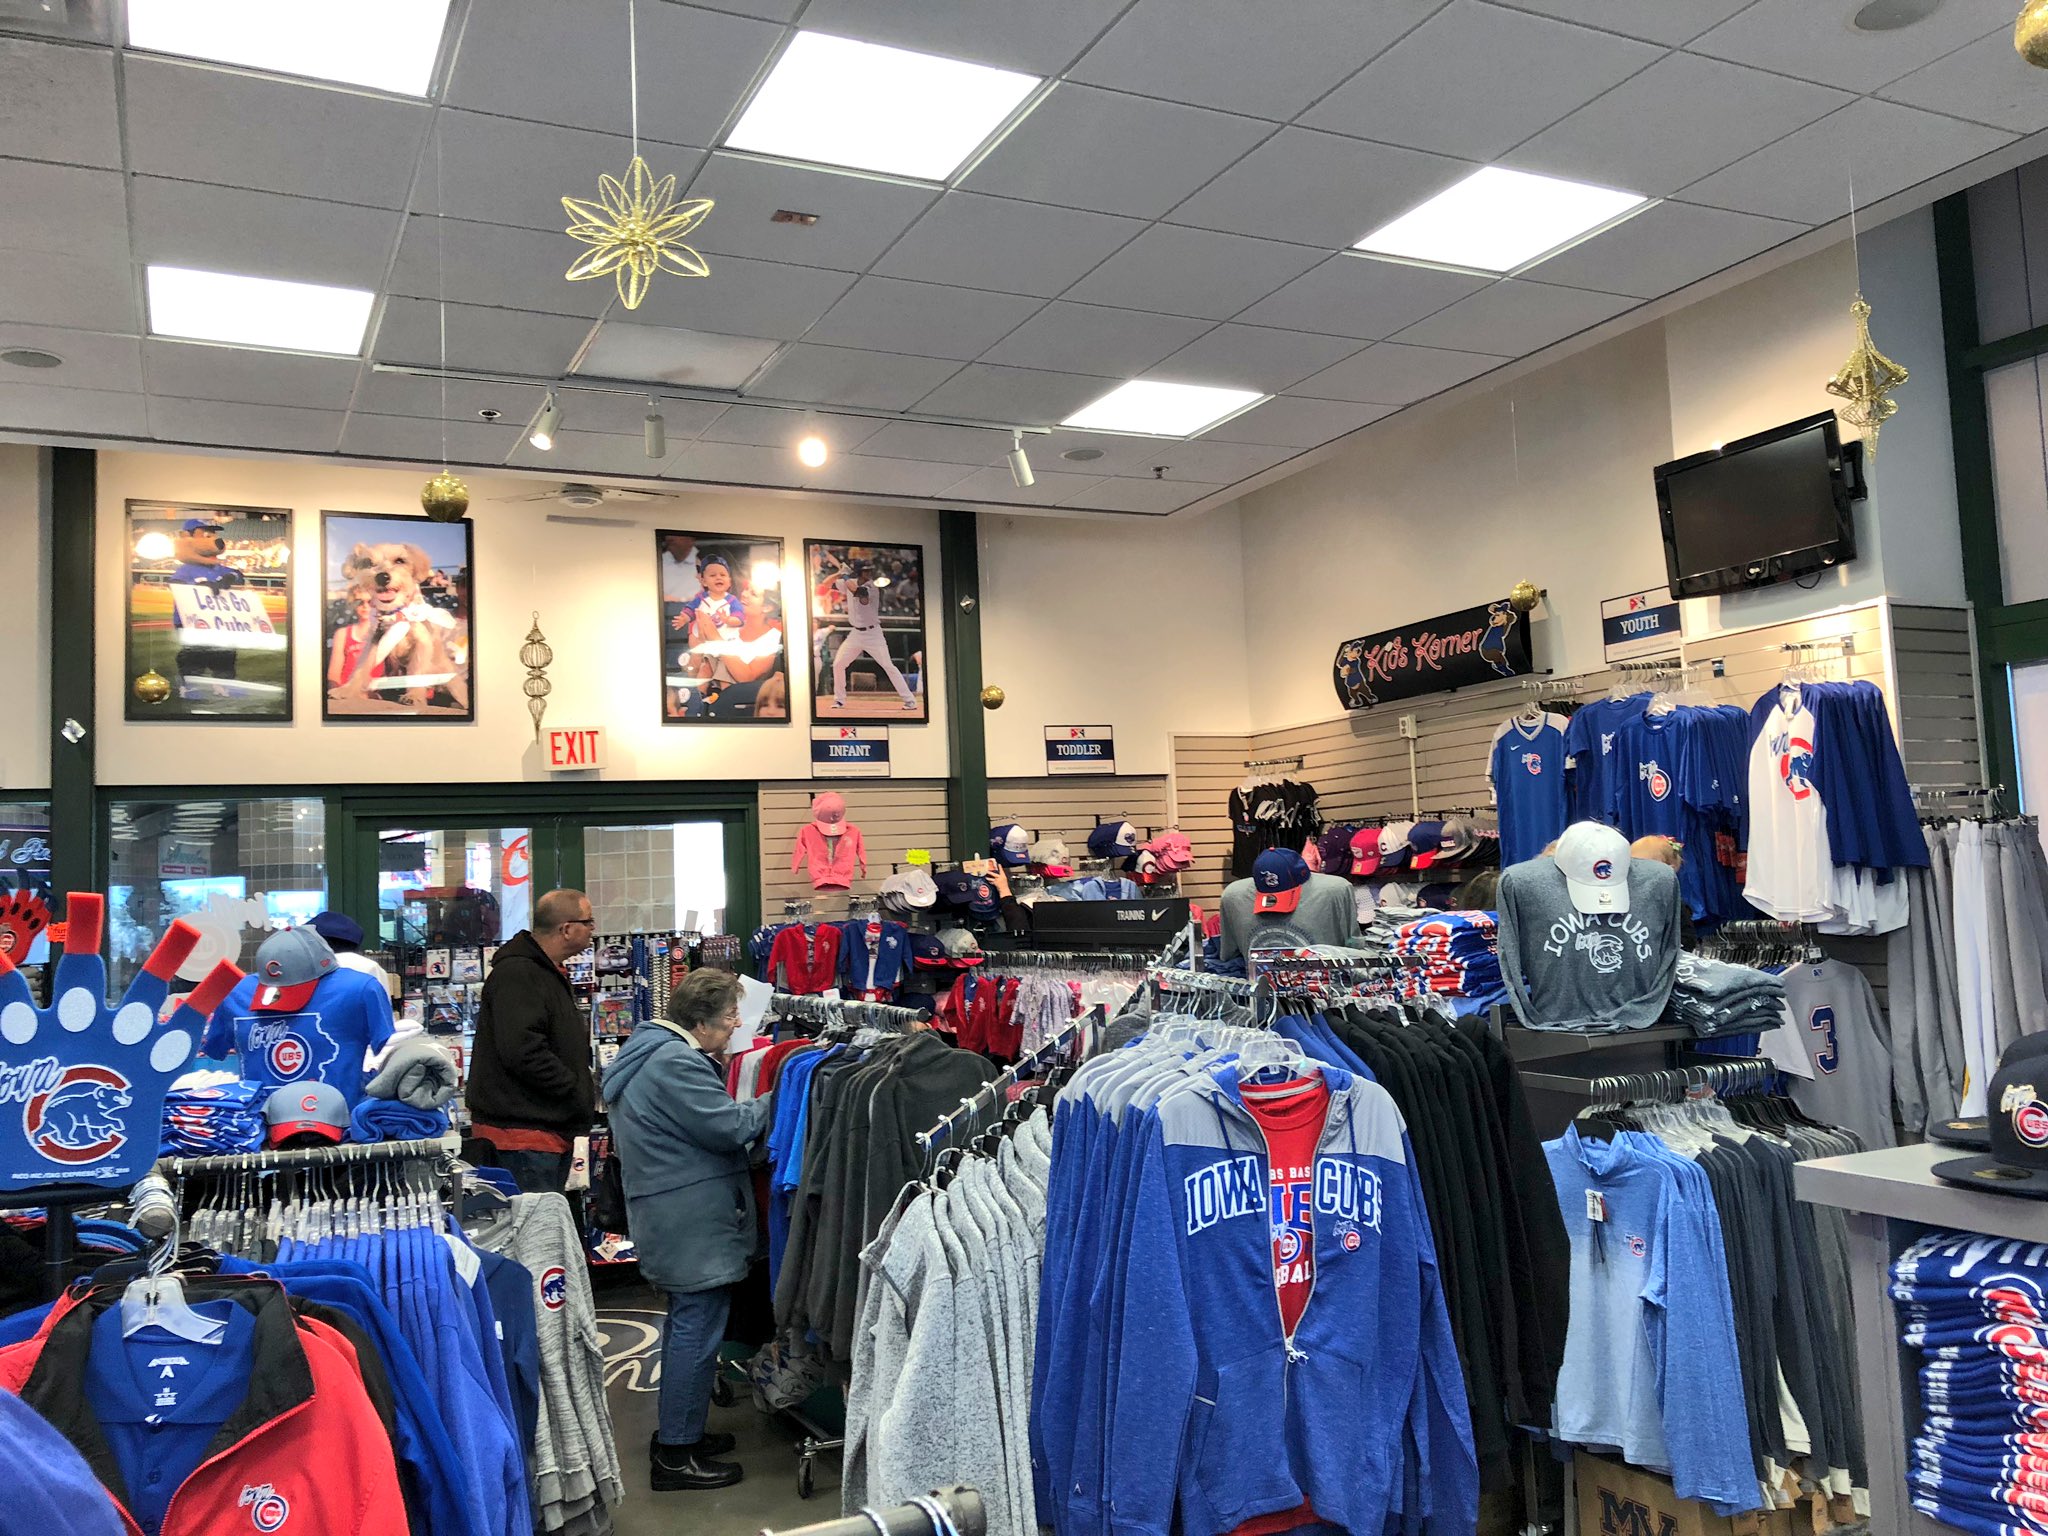 Iowa Cubs on X: The Iowa Cubs Team Store is open until 1 pm with